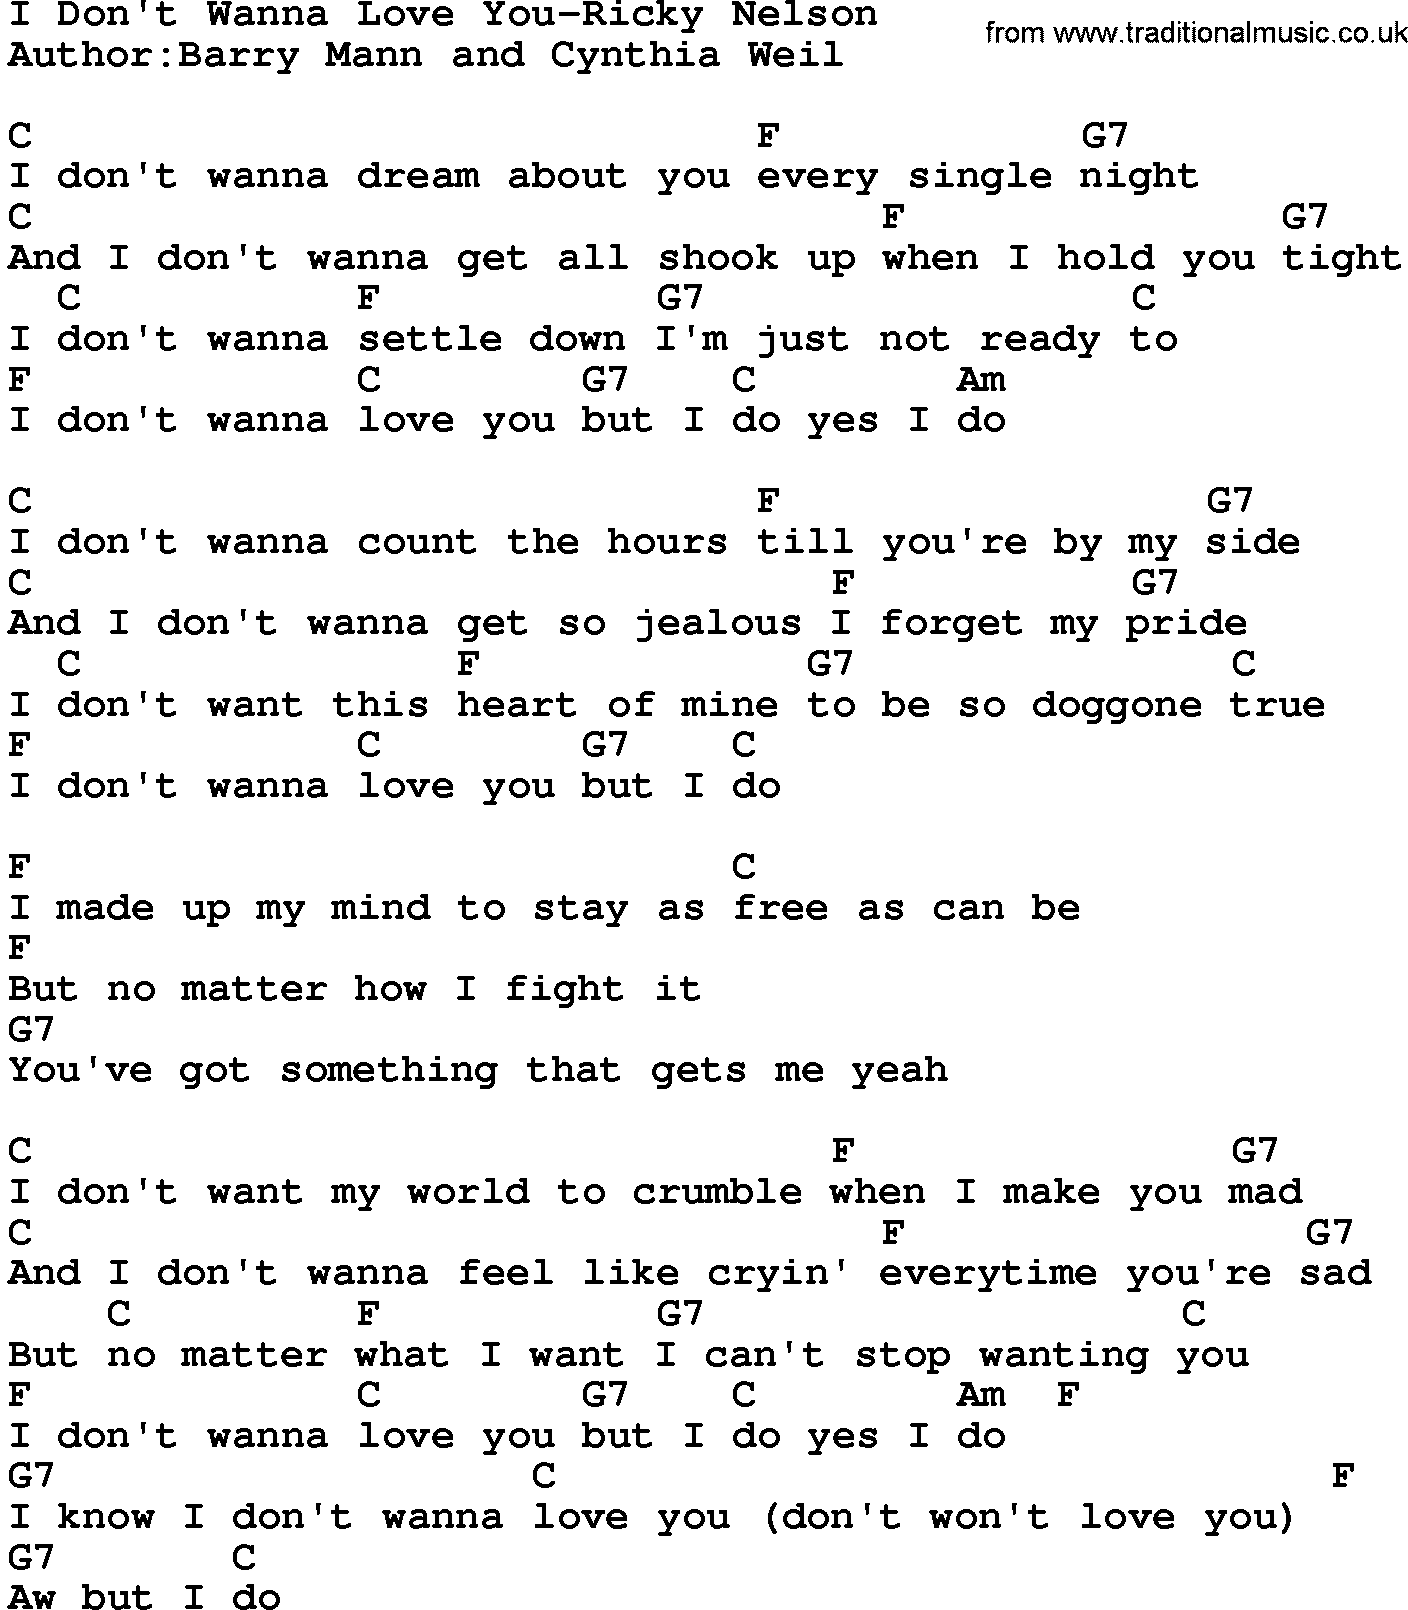 Country music song: I Don't Wanna Love You-Ricky Nelson lyrics and chords